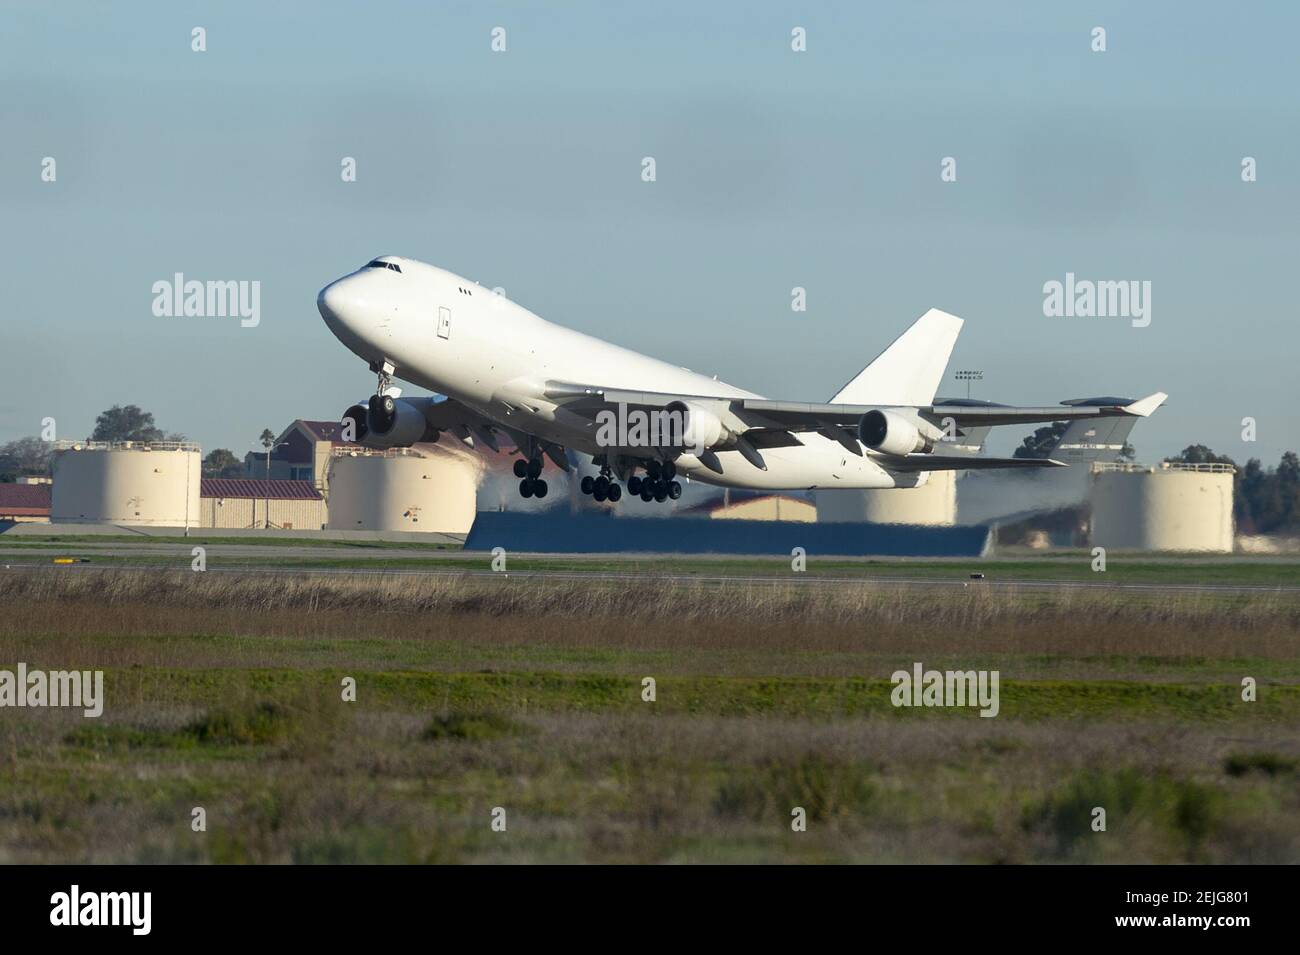 A white government chartered Boeing 747-400F cargo plane is seen departing for Marine Corps Air Station Miramar in San Diego with Americans evacuated from Wuhan, the epicenter of China coronavirus outbreak, at Travis Air Force Base in Fairfield, California, United States on February 5, 2020. Travis Air Force Base and Marine Corps Air Station Miramar are prepared to house hundreds of Americans returning from China for quarantine due to the novel coronavirus outbreak. (Photo by Yichuan Cao/Sipa USA) Stock Photo